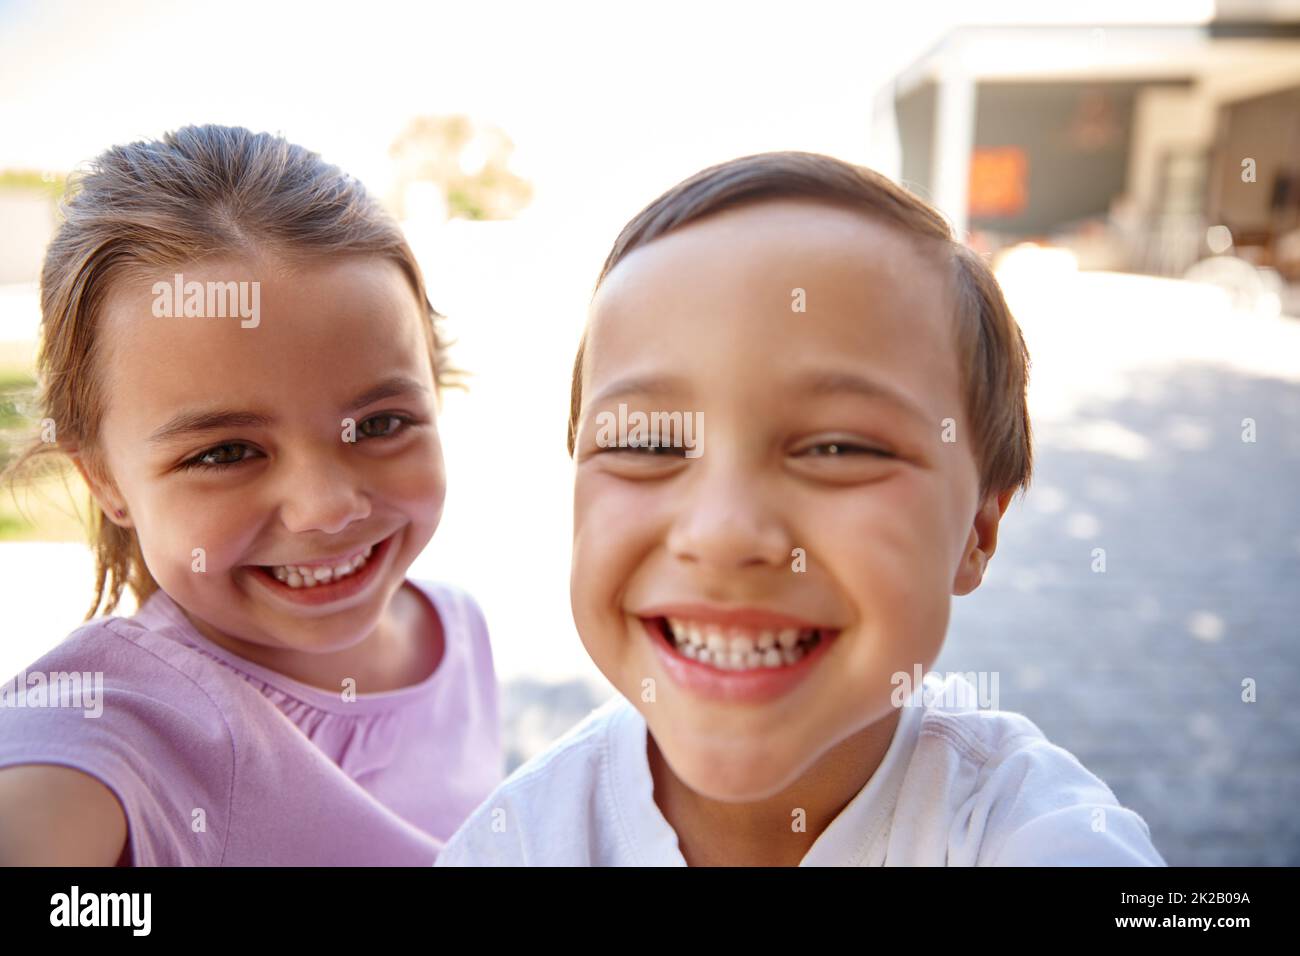 Theyre so excited. Two cute little children smiling and laughing together. Stock Photo